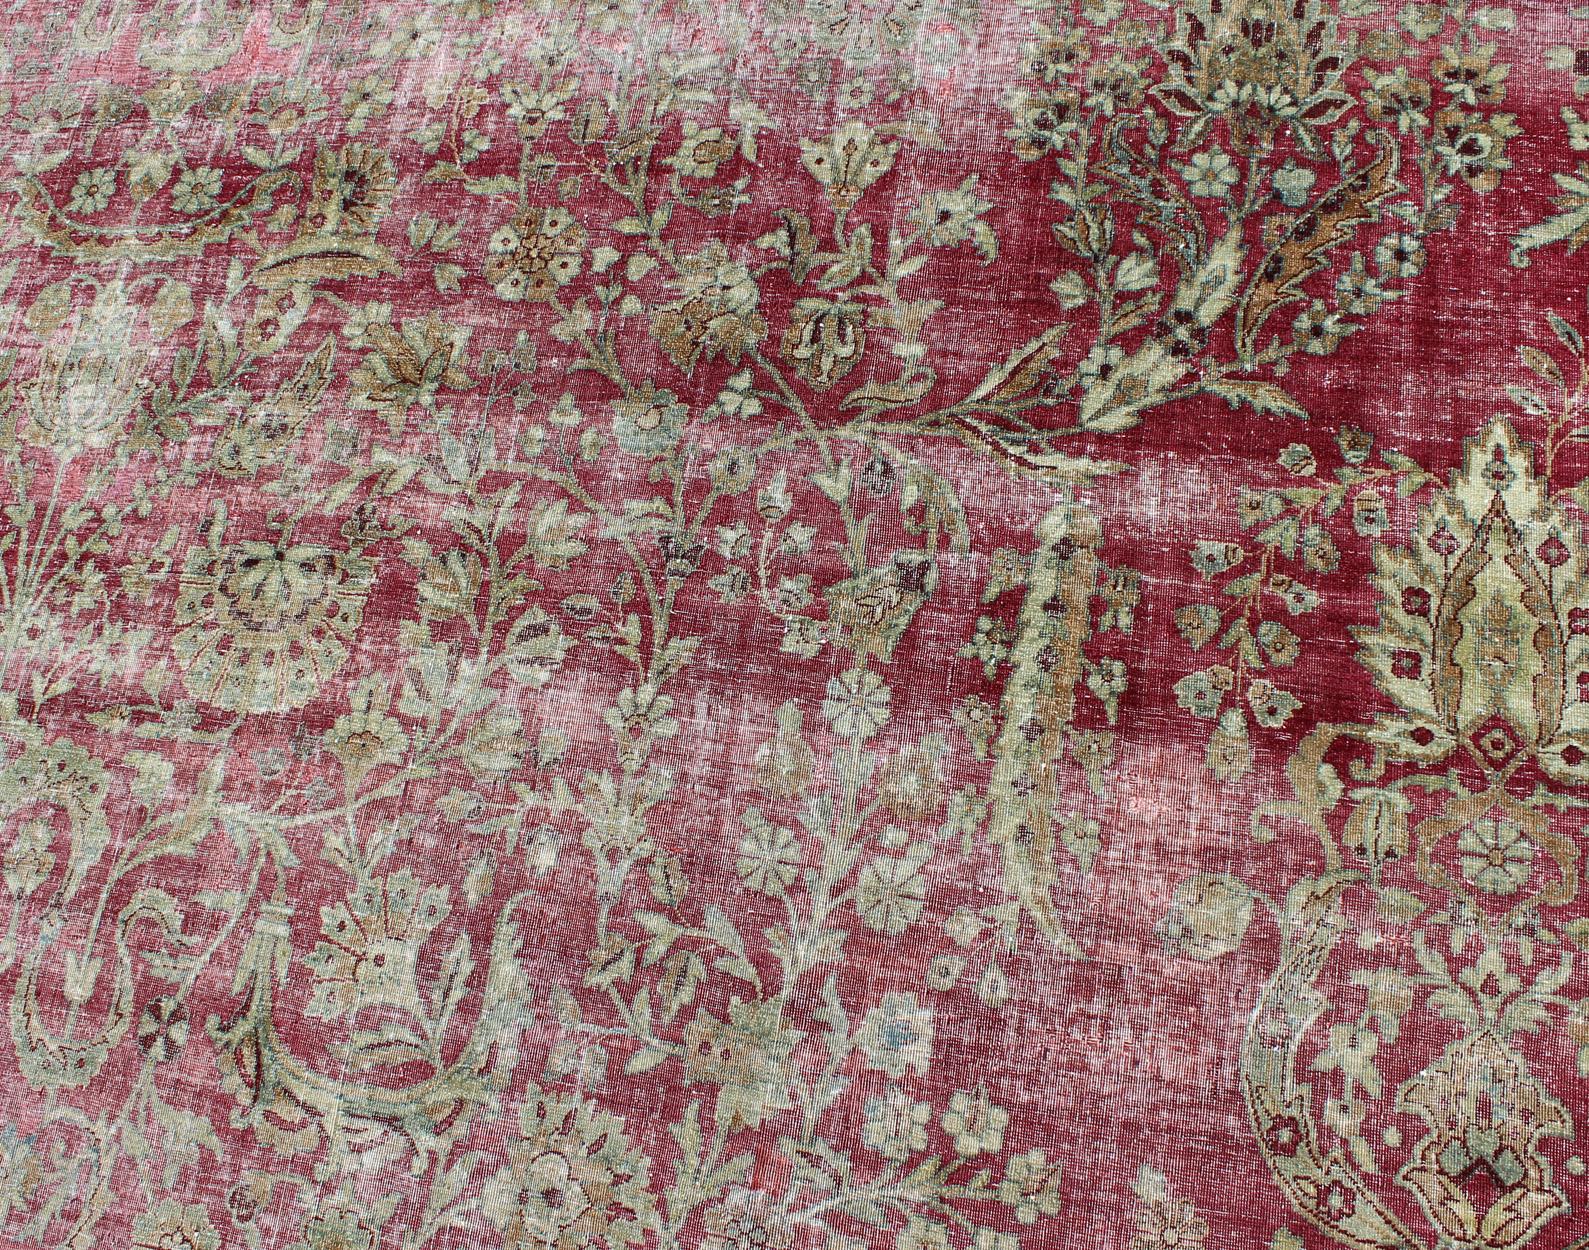 Wool Distressed Antique Persian Lavar Kerman Rug in All-Over Intricate Floral Design For Sale